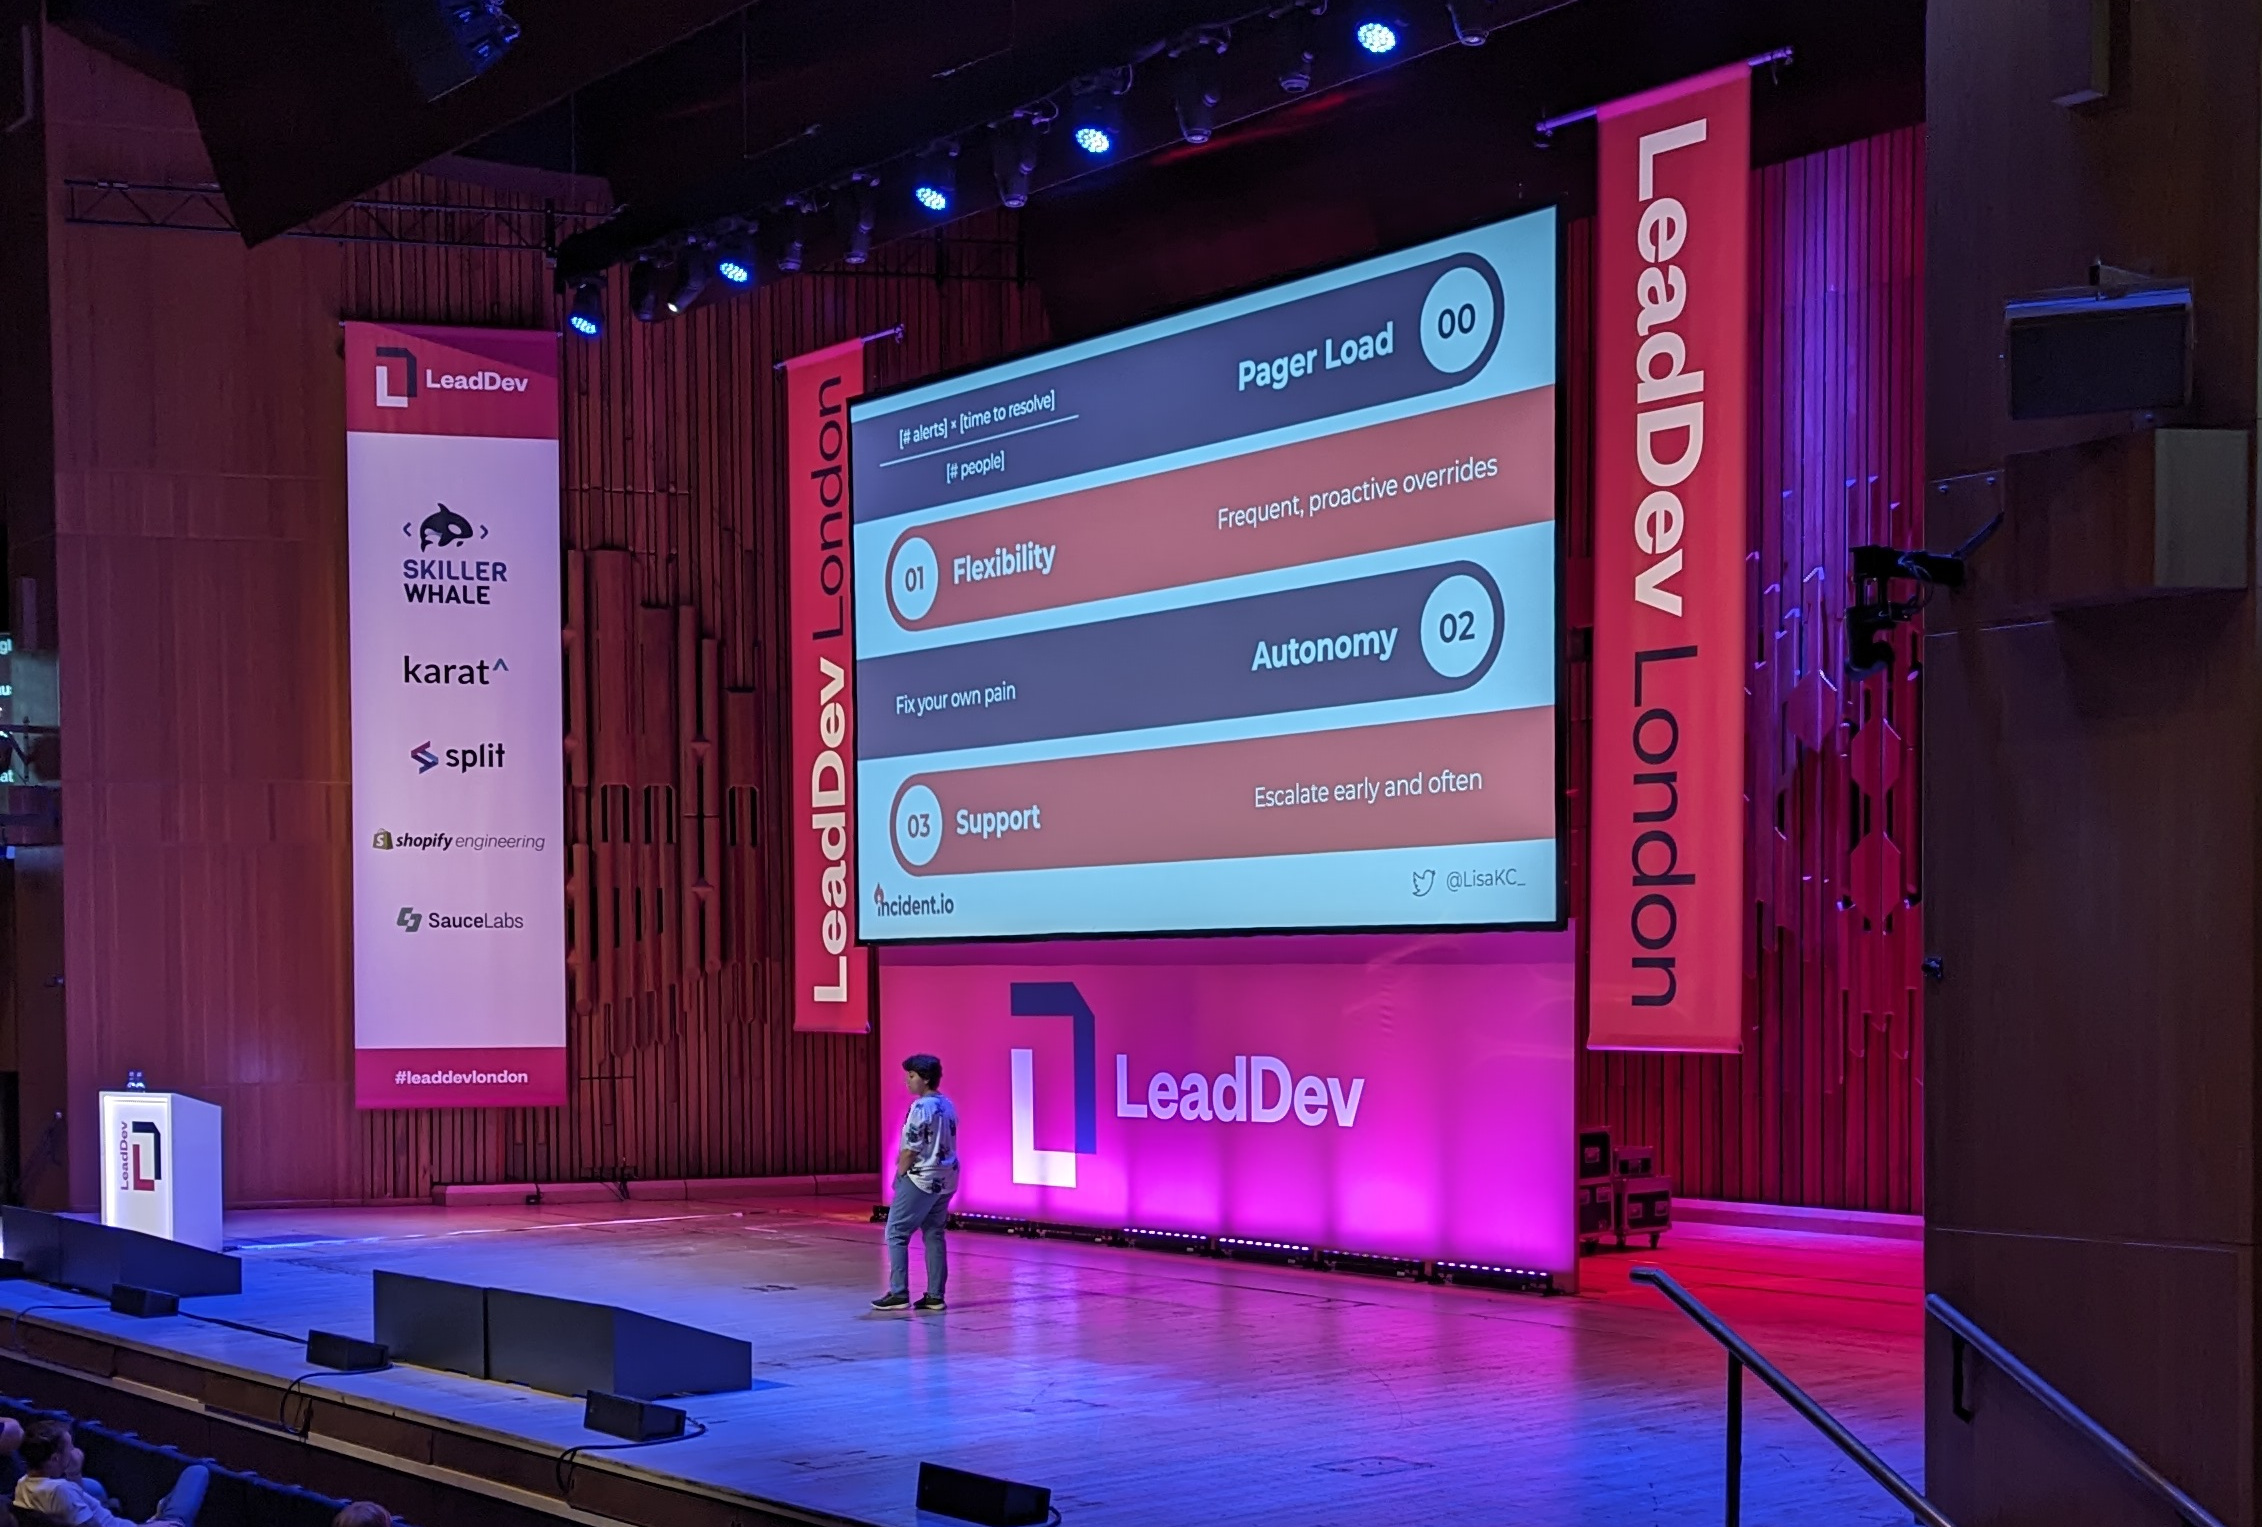 Lisa standing on the stage at LeadDev London, with the slide behind her showing four key areas to work on to make on-call nicer. First, Pager Load to ensure that there aren't too many alerts for the number of people on the rota. Secondly, Flexibility, to allow for frequent, proactive overrides. Third, teams need Autonomy to allow them to fix their own pain points. And finally, Support, to allow engineers to escalate early and often